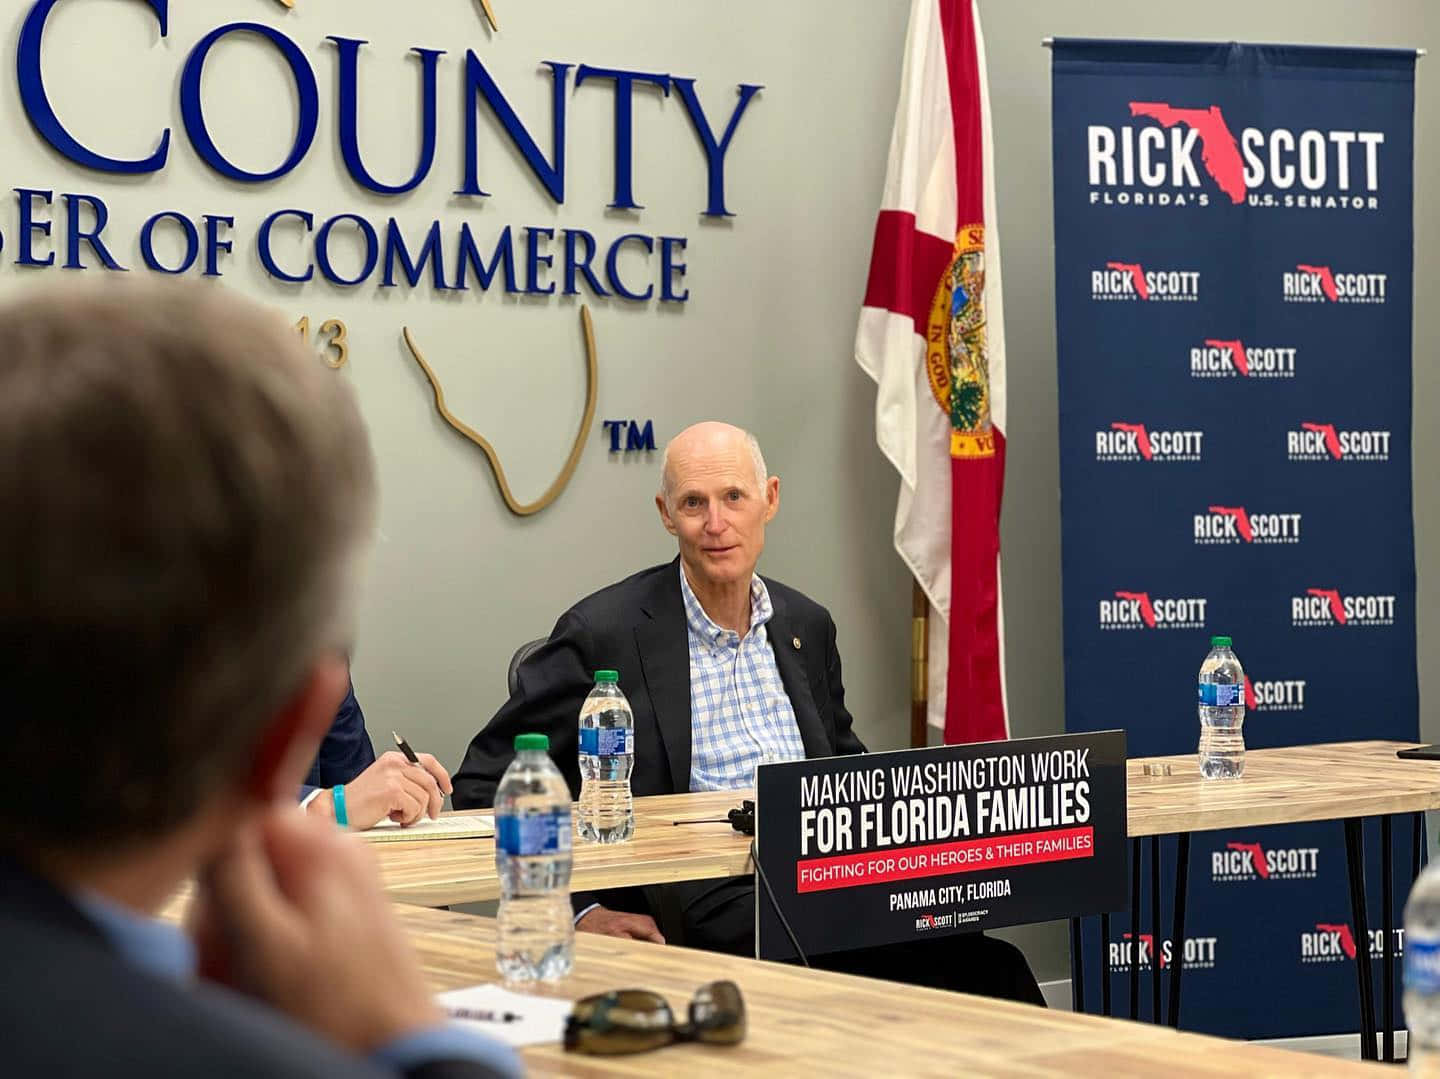 Former Governor Rick Scott Leading a Roundtable Discussion. Wallpaper